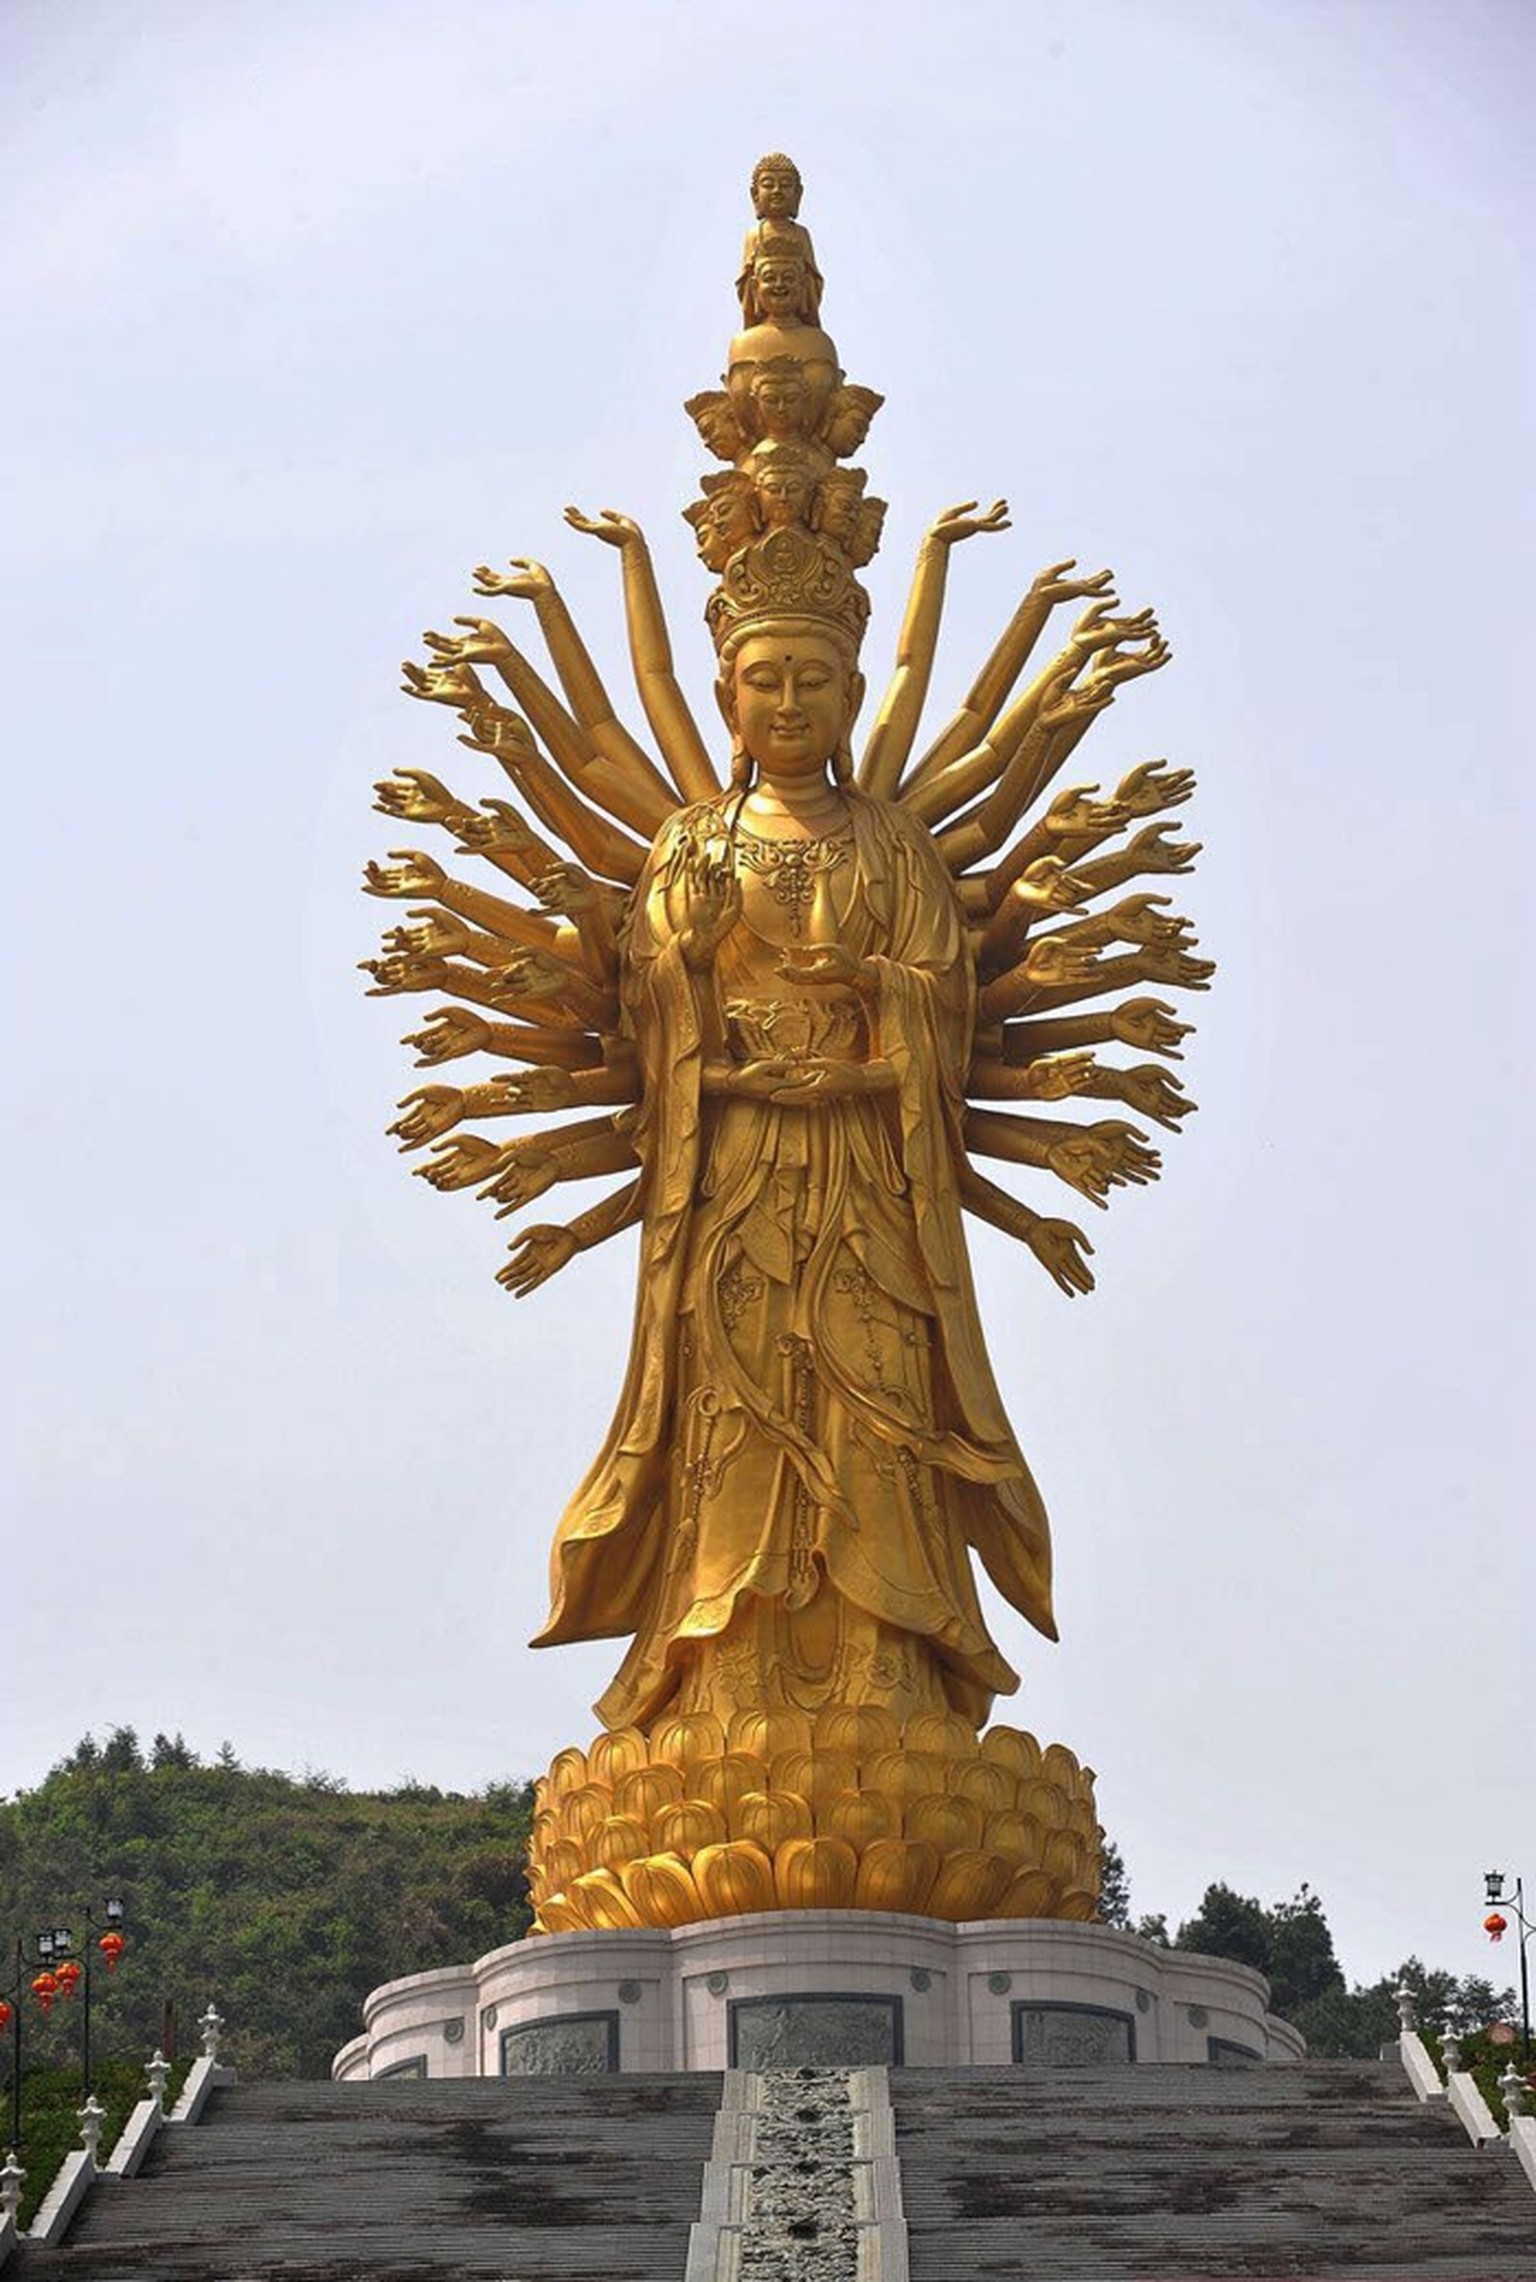 The Guishan Guanyin of the Thousand Hands and Eyes is the fourth-tallest statue in China, and the sixth-tallest in the world. This gilded bronze monument depicting Avalokitesvara stands 99 m (325 ft)  ...